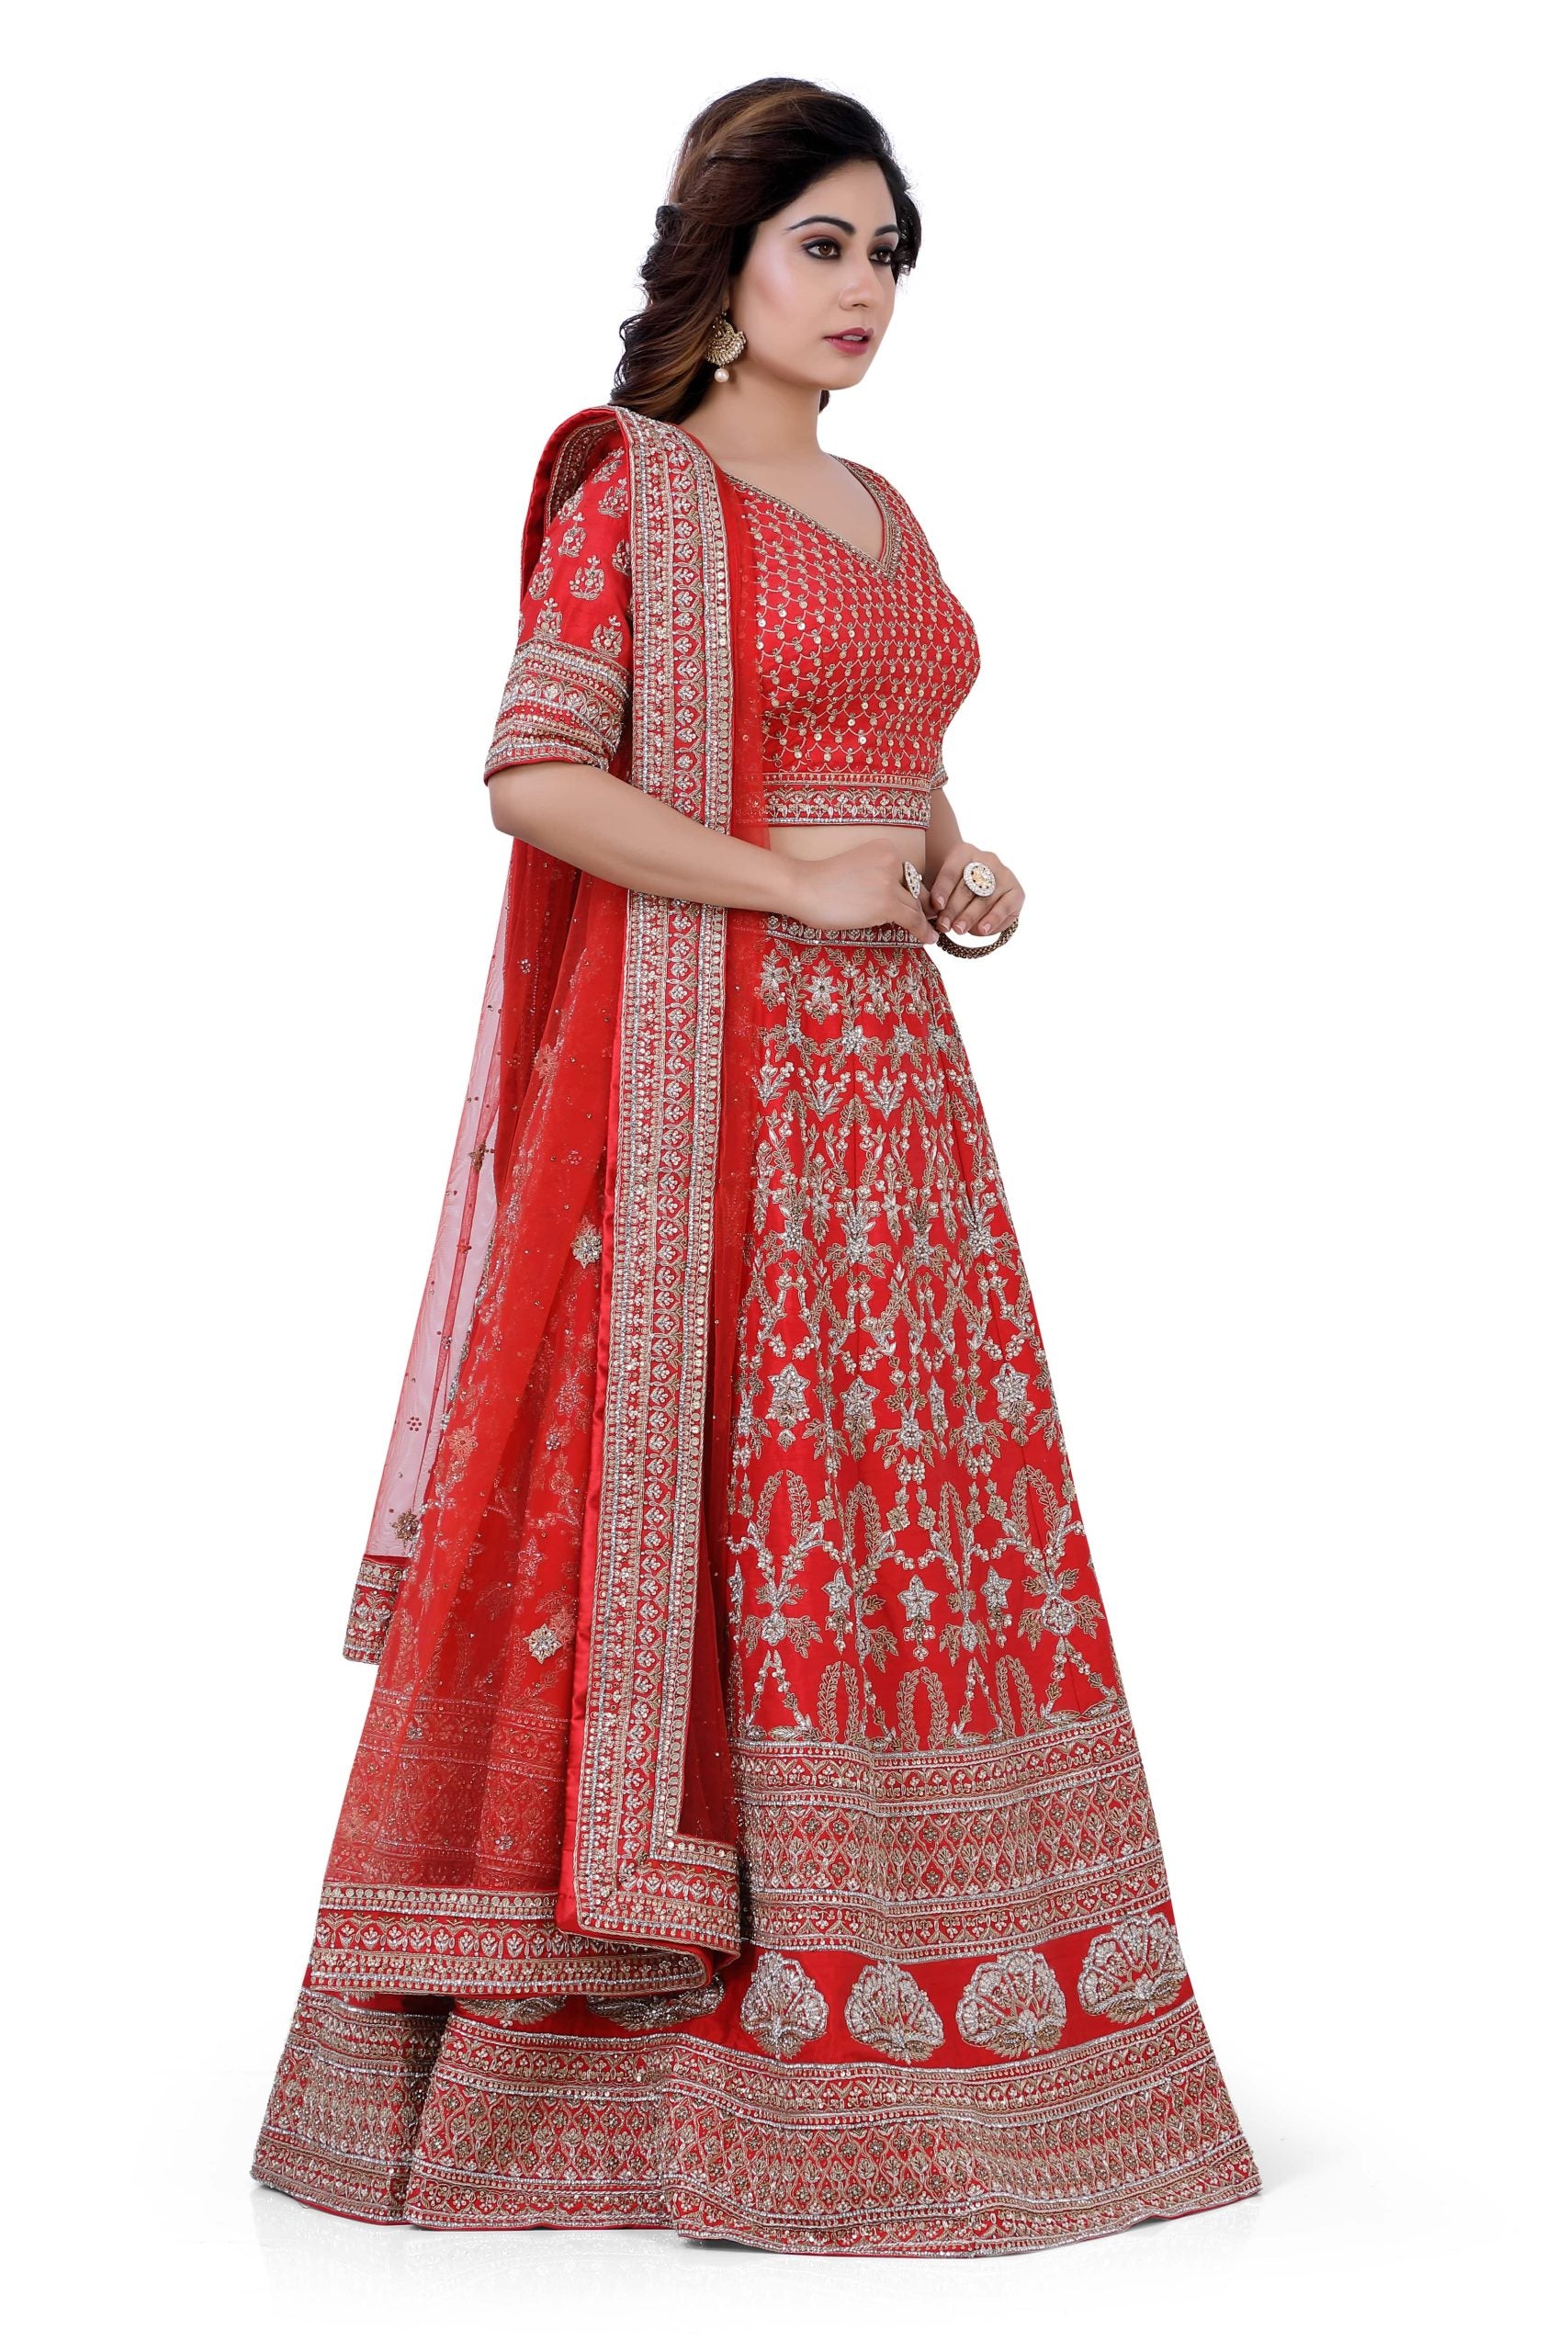 Bridal Lehenga Choli in Red Color with Heavy  Hand embroidery